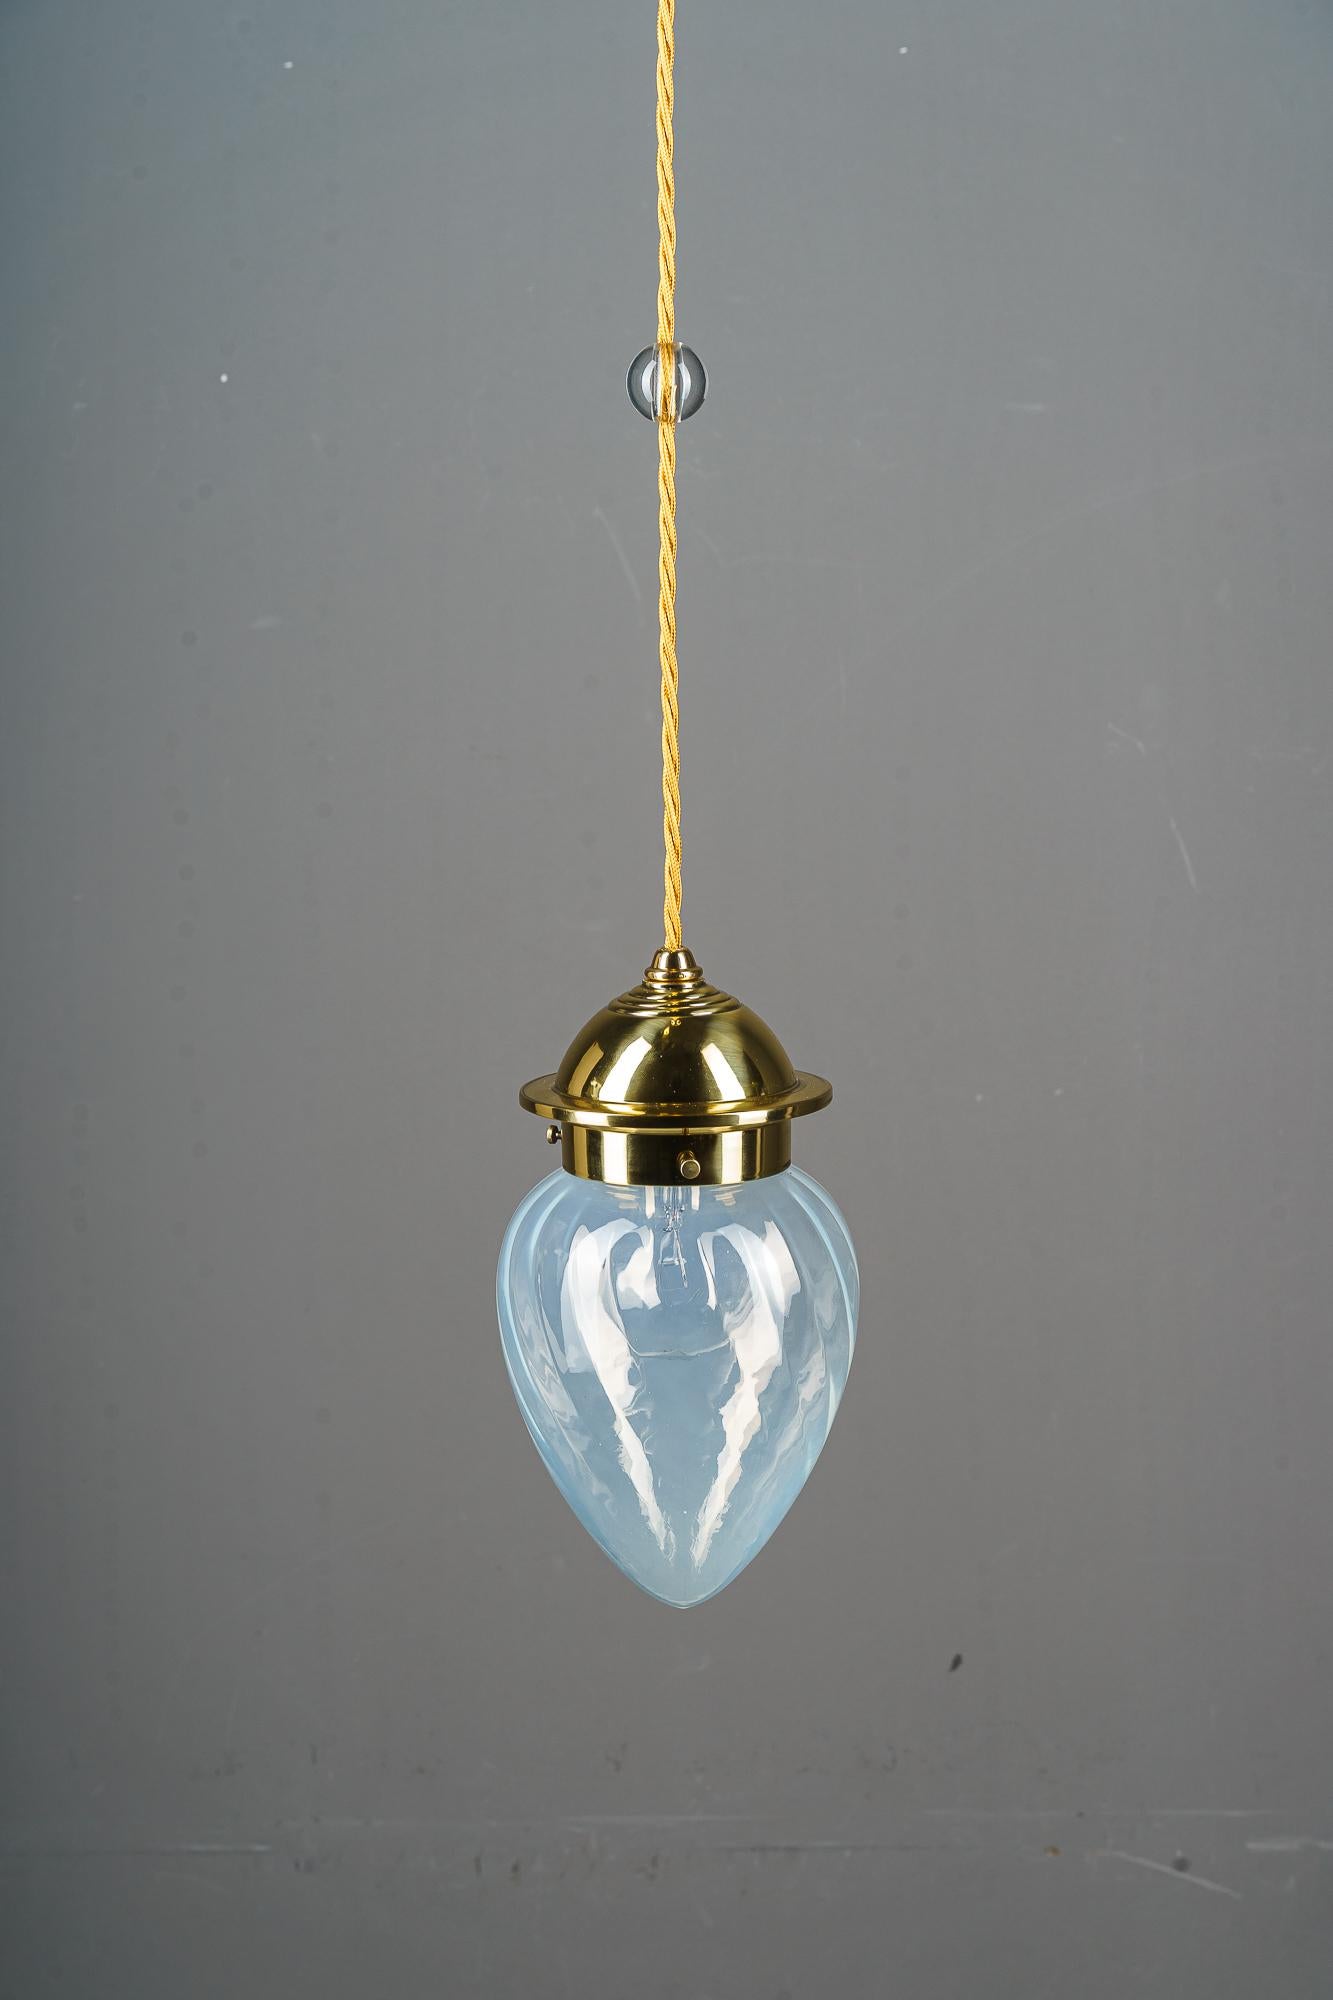 3x art deco pendant with blue opaline glass shades vienna around 1920s
Brass polished and stove enameled
Original opaline glass shade